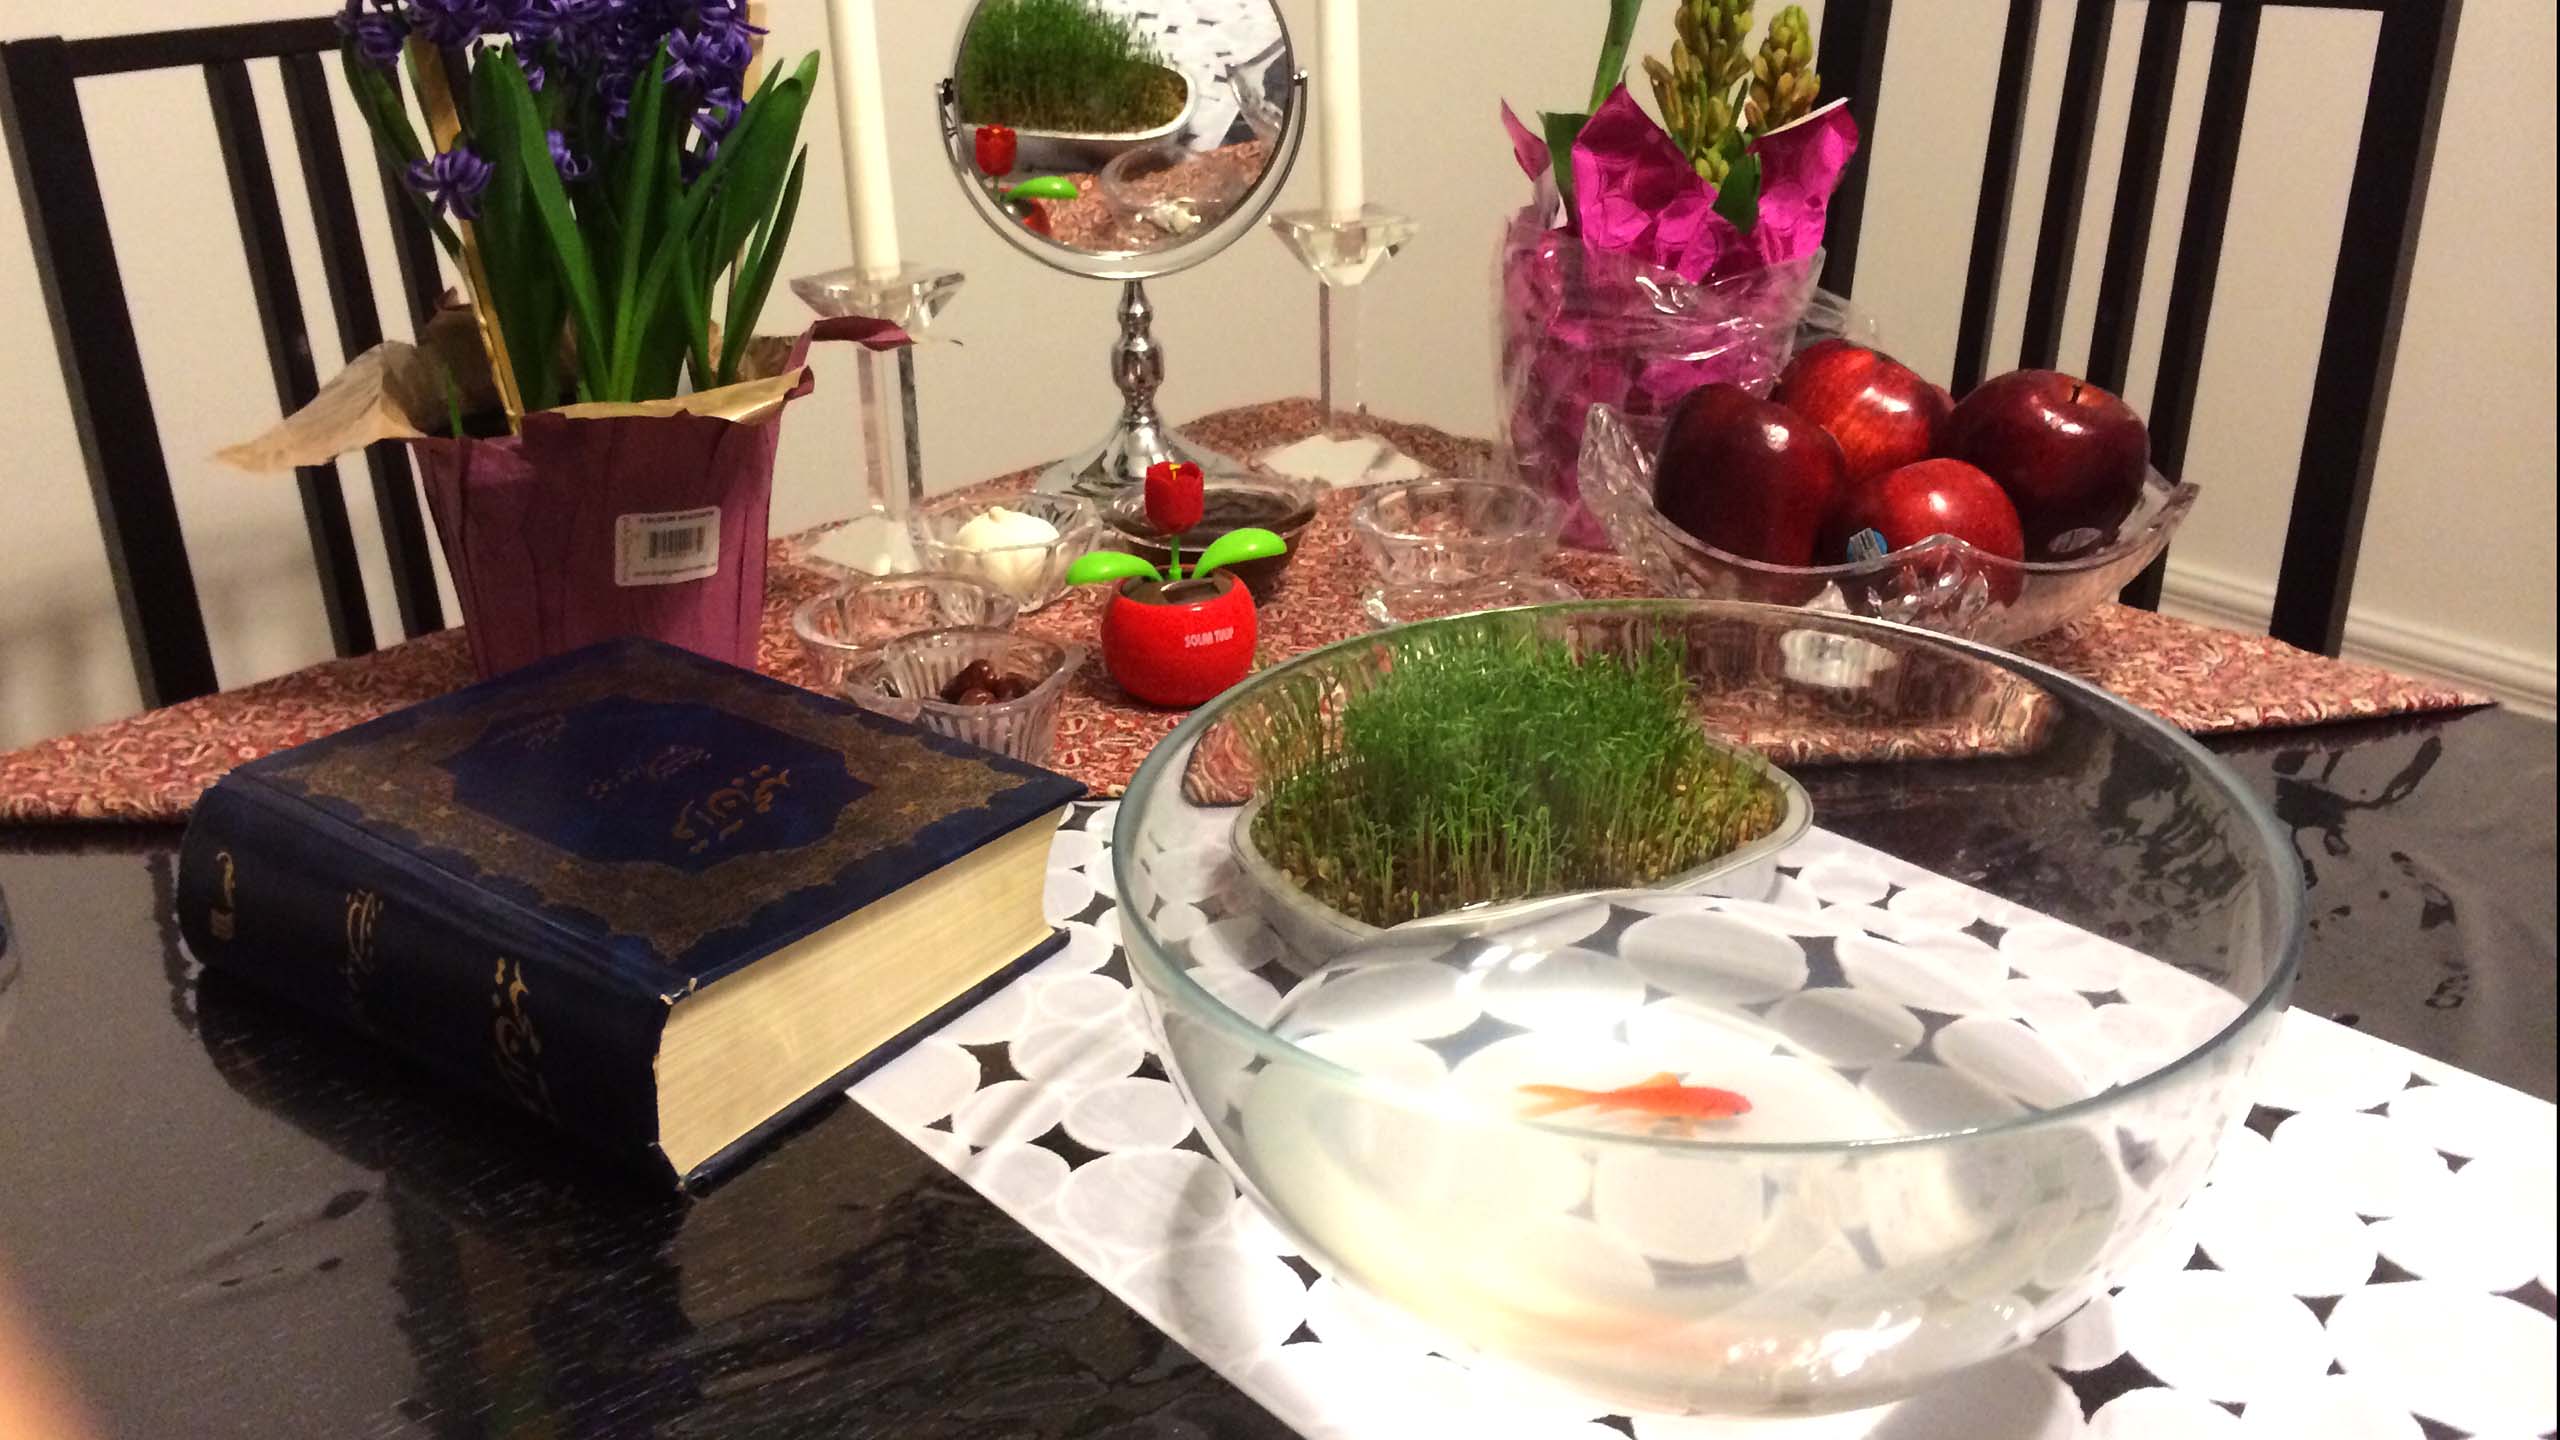 Bob, the gold fish, swims around in his bowl as part of the Fekri 2014 Nowruz sofre (new year's spread).